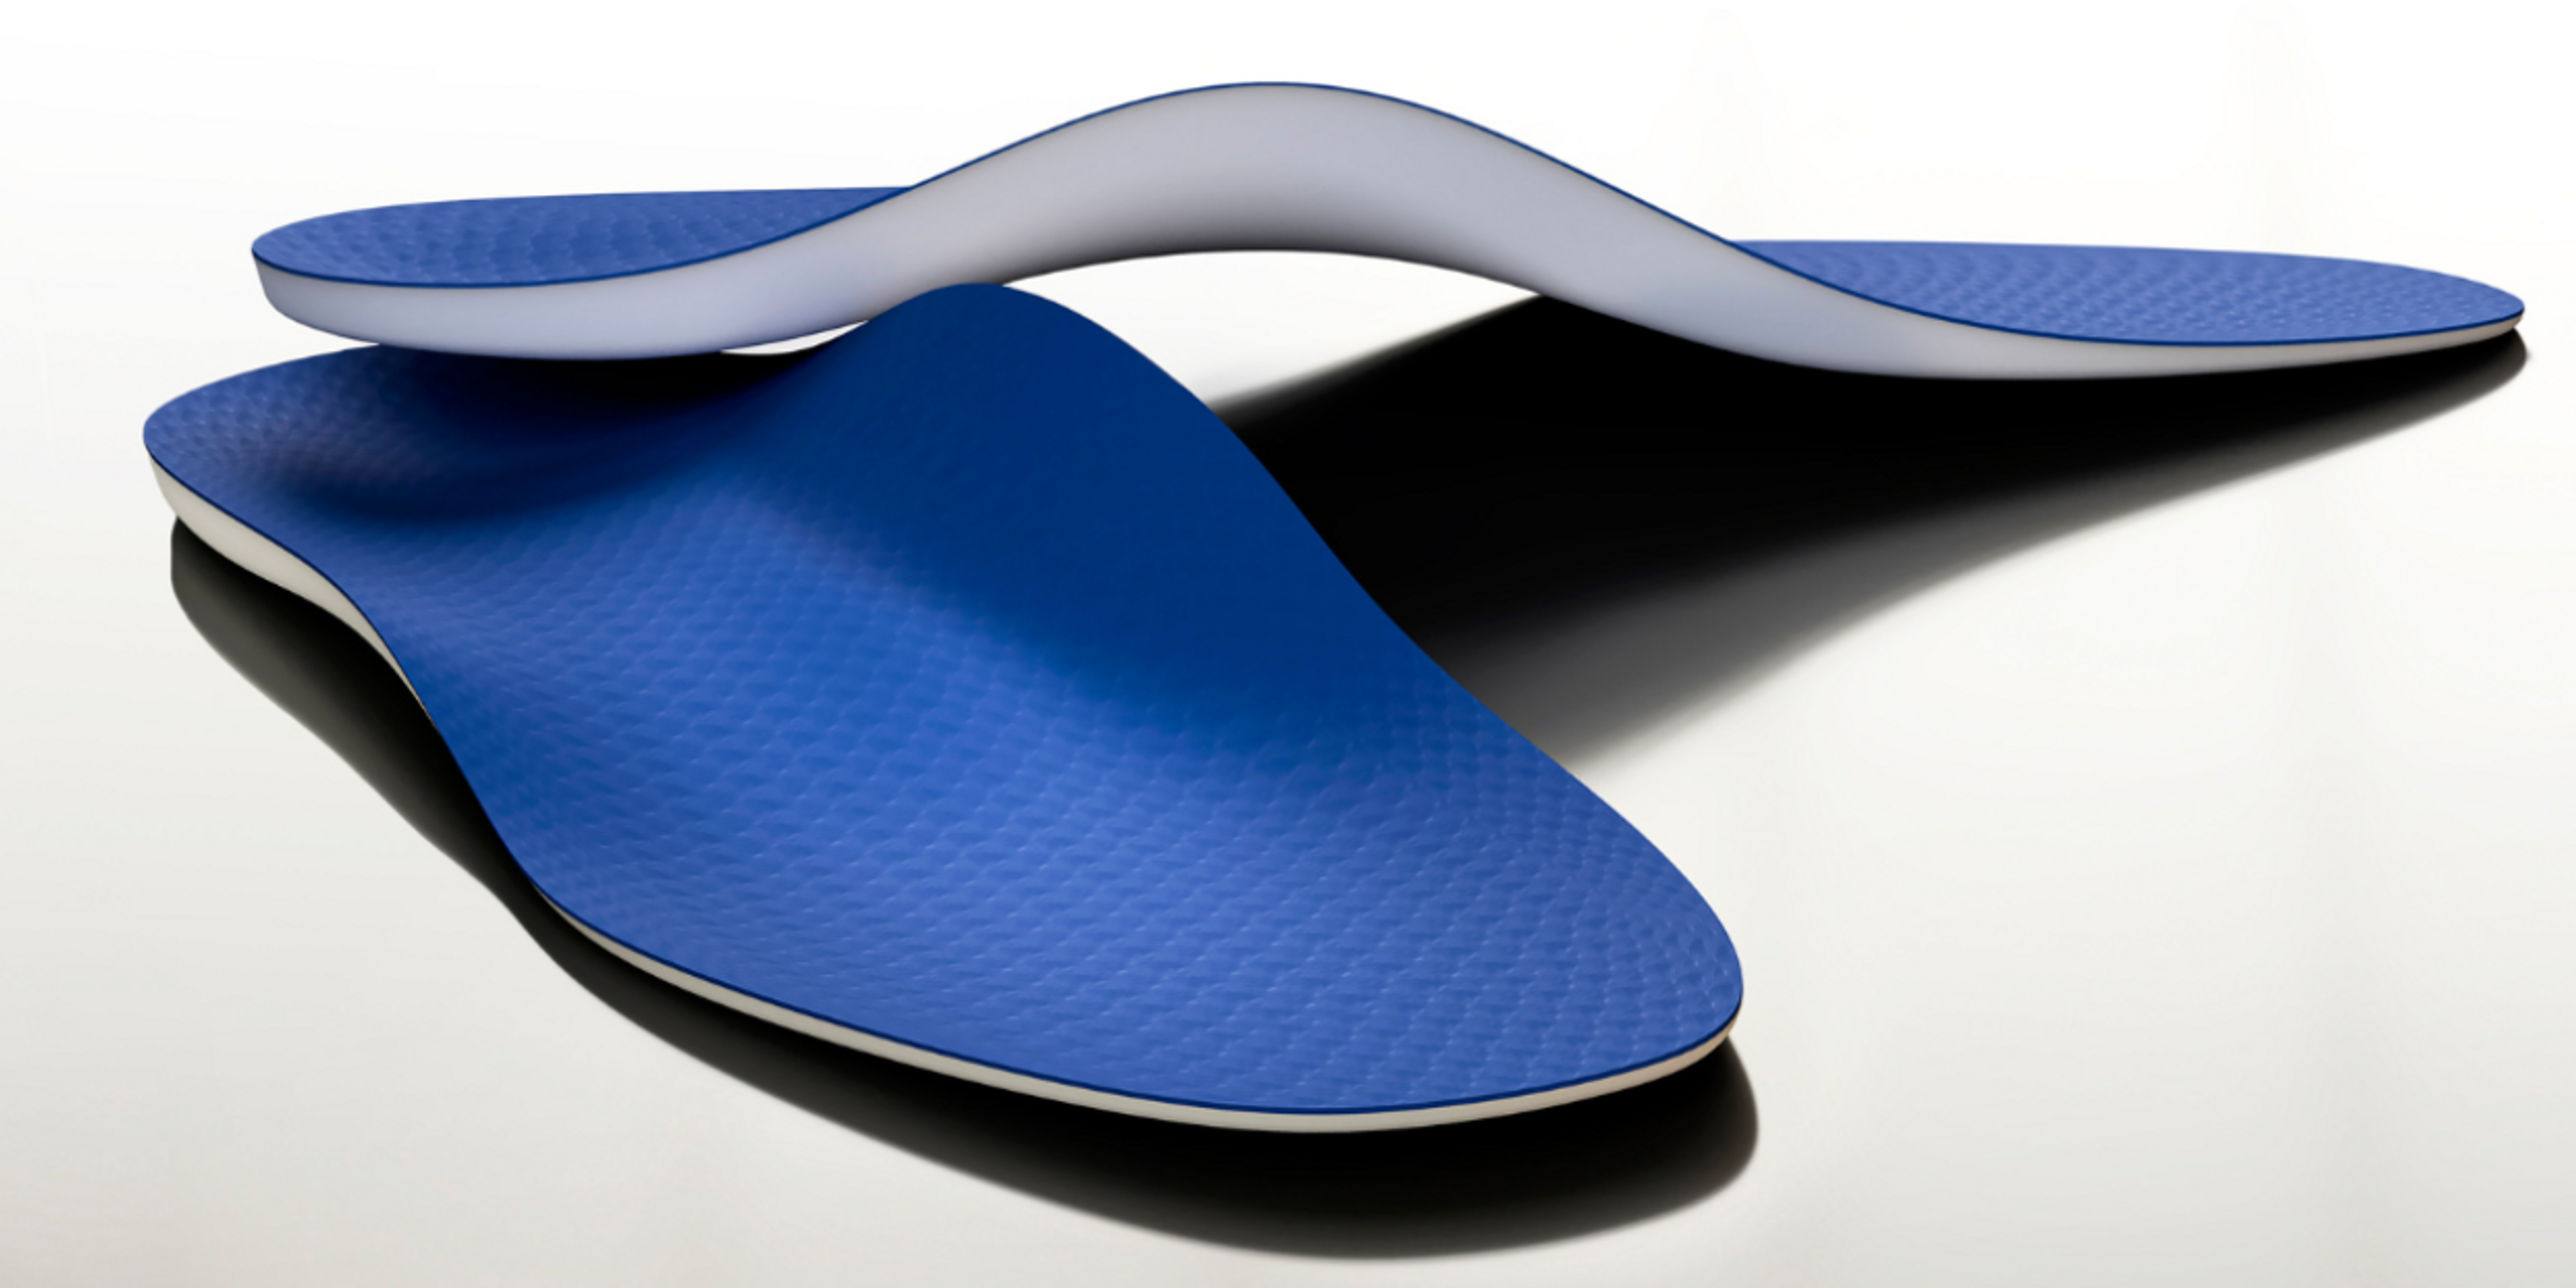 Prefabricated insoles come with a variety of features but are usually just a rough fit. They can be a cheap way to test if insoles help your plantar fasciitis.